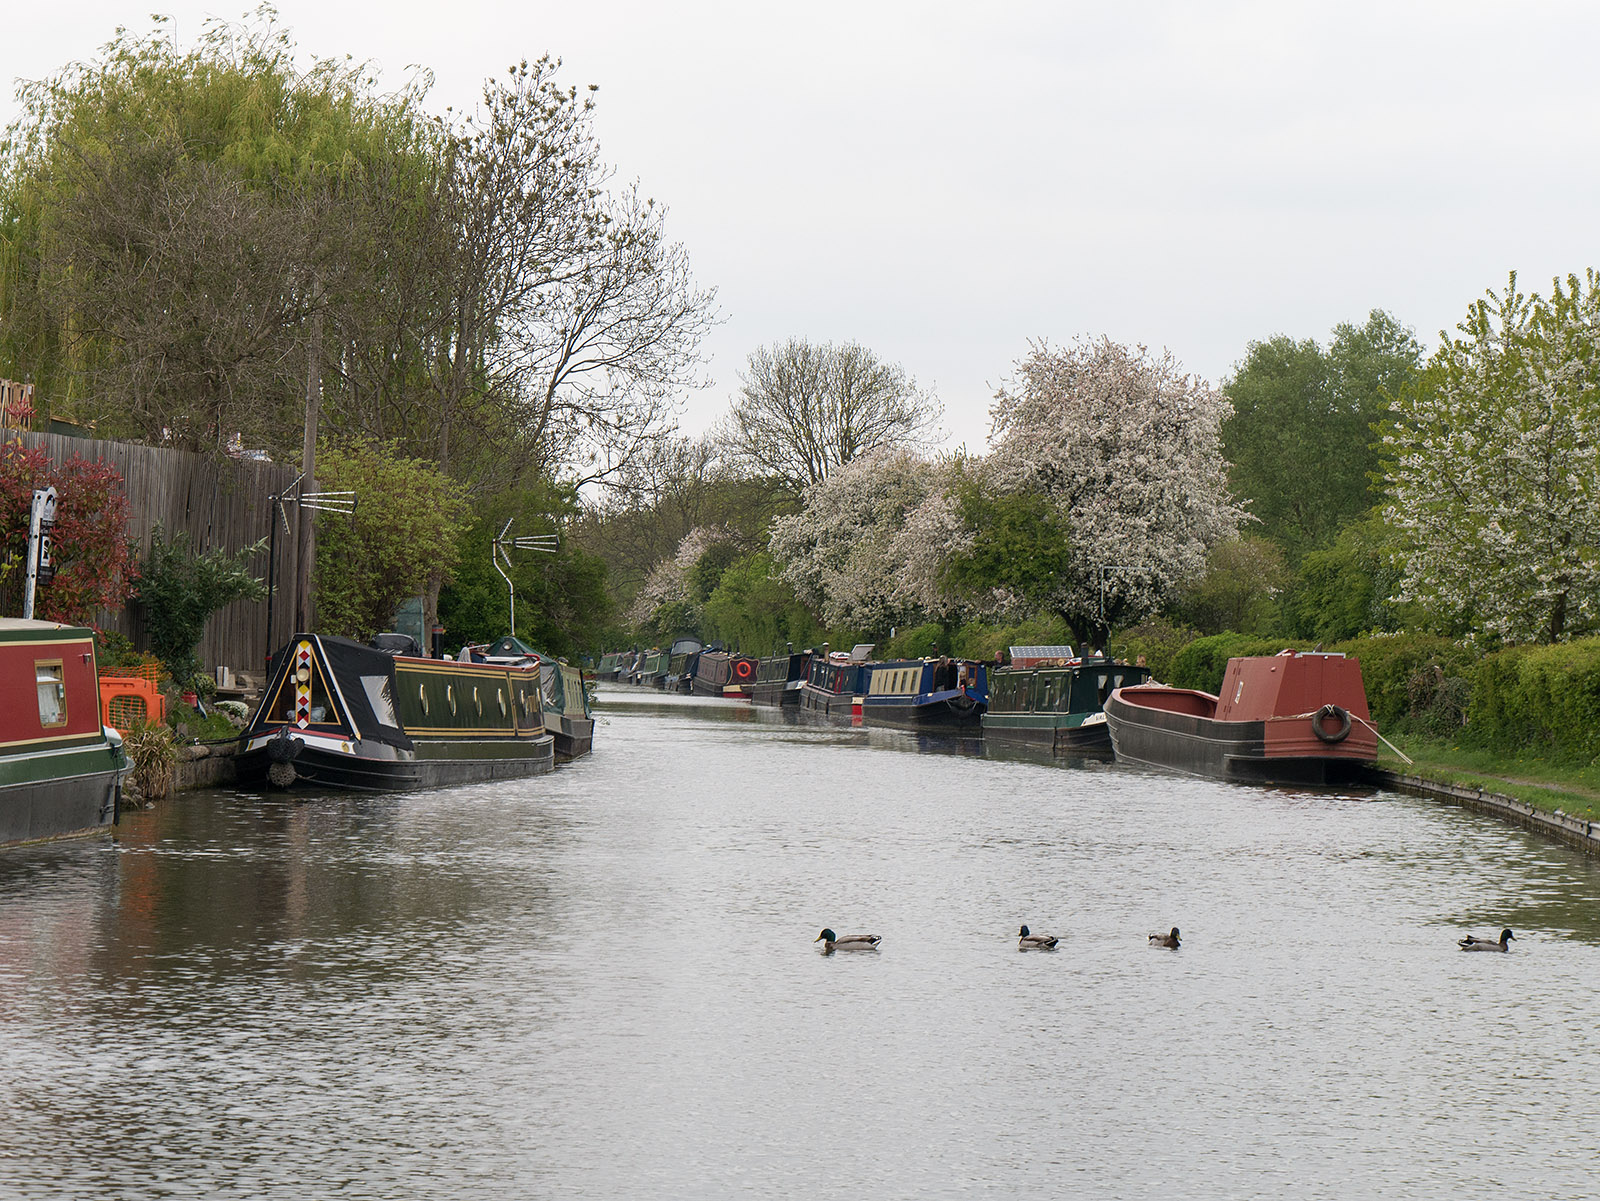 Looking north from Fenny Stratford lock